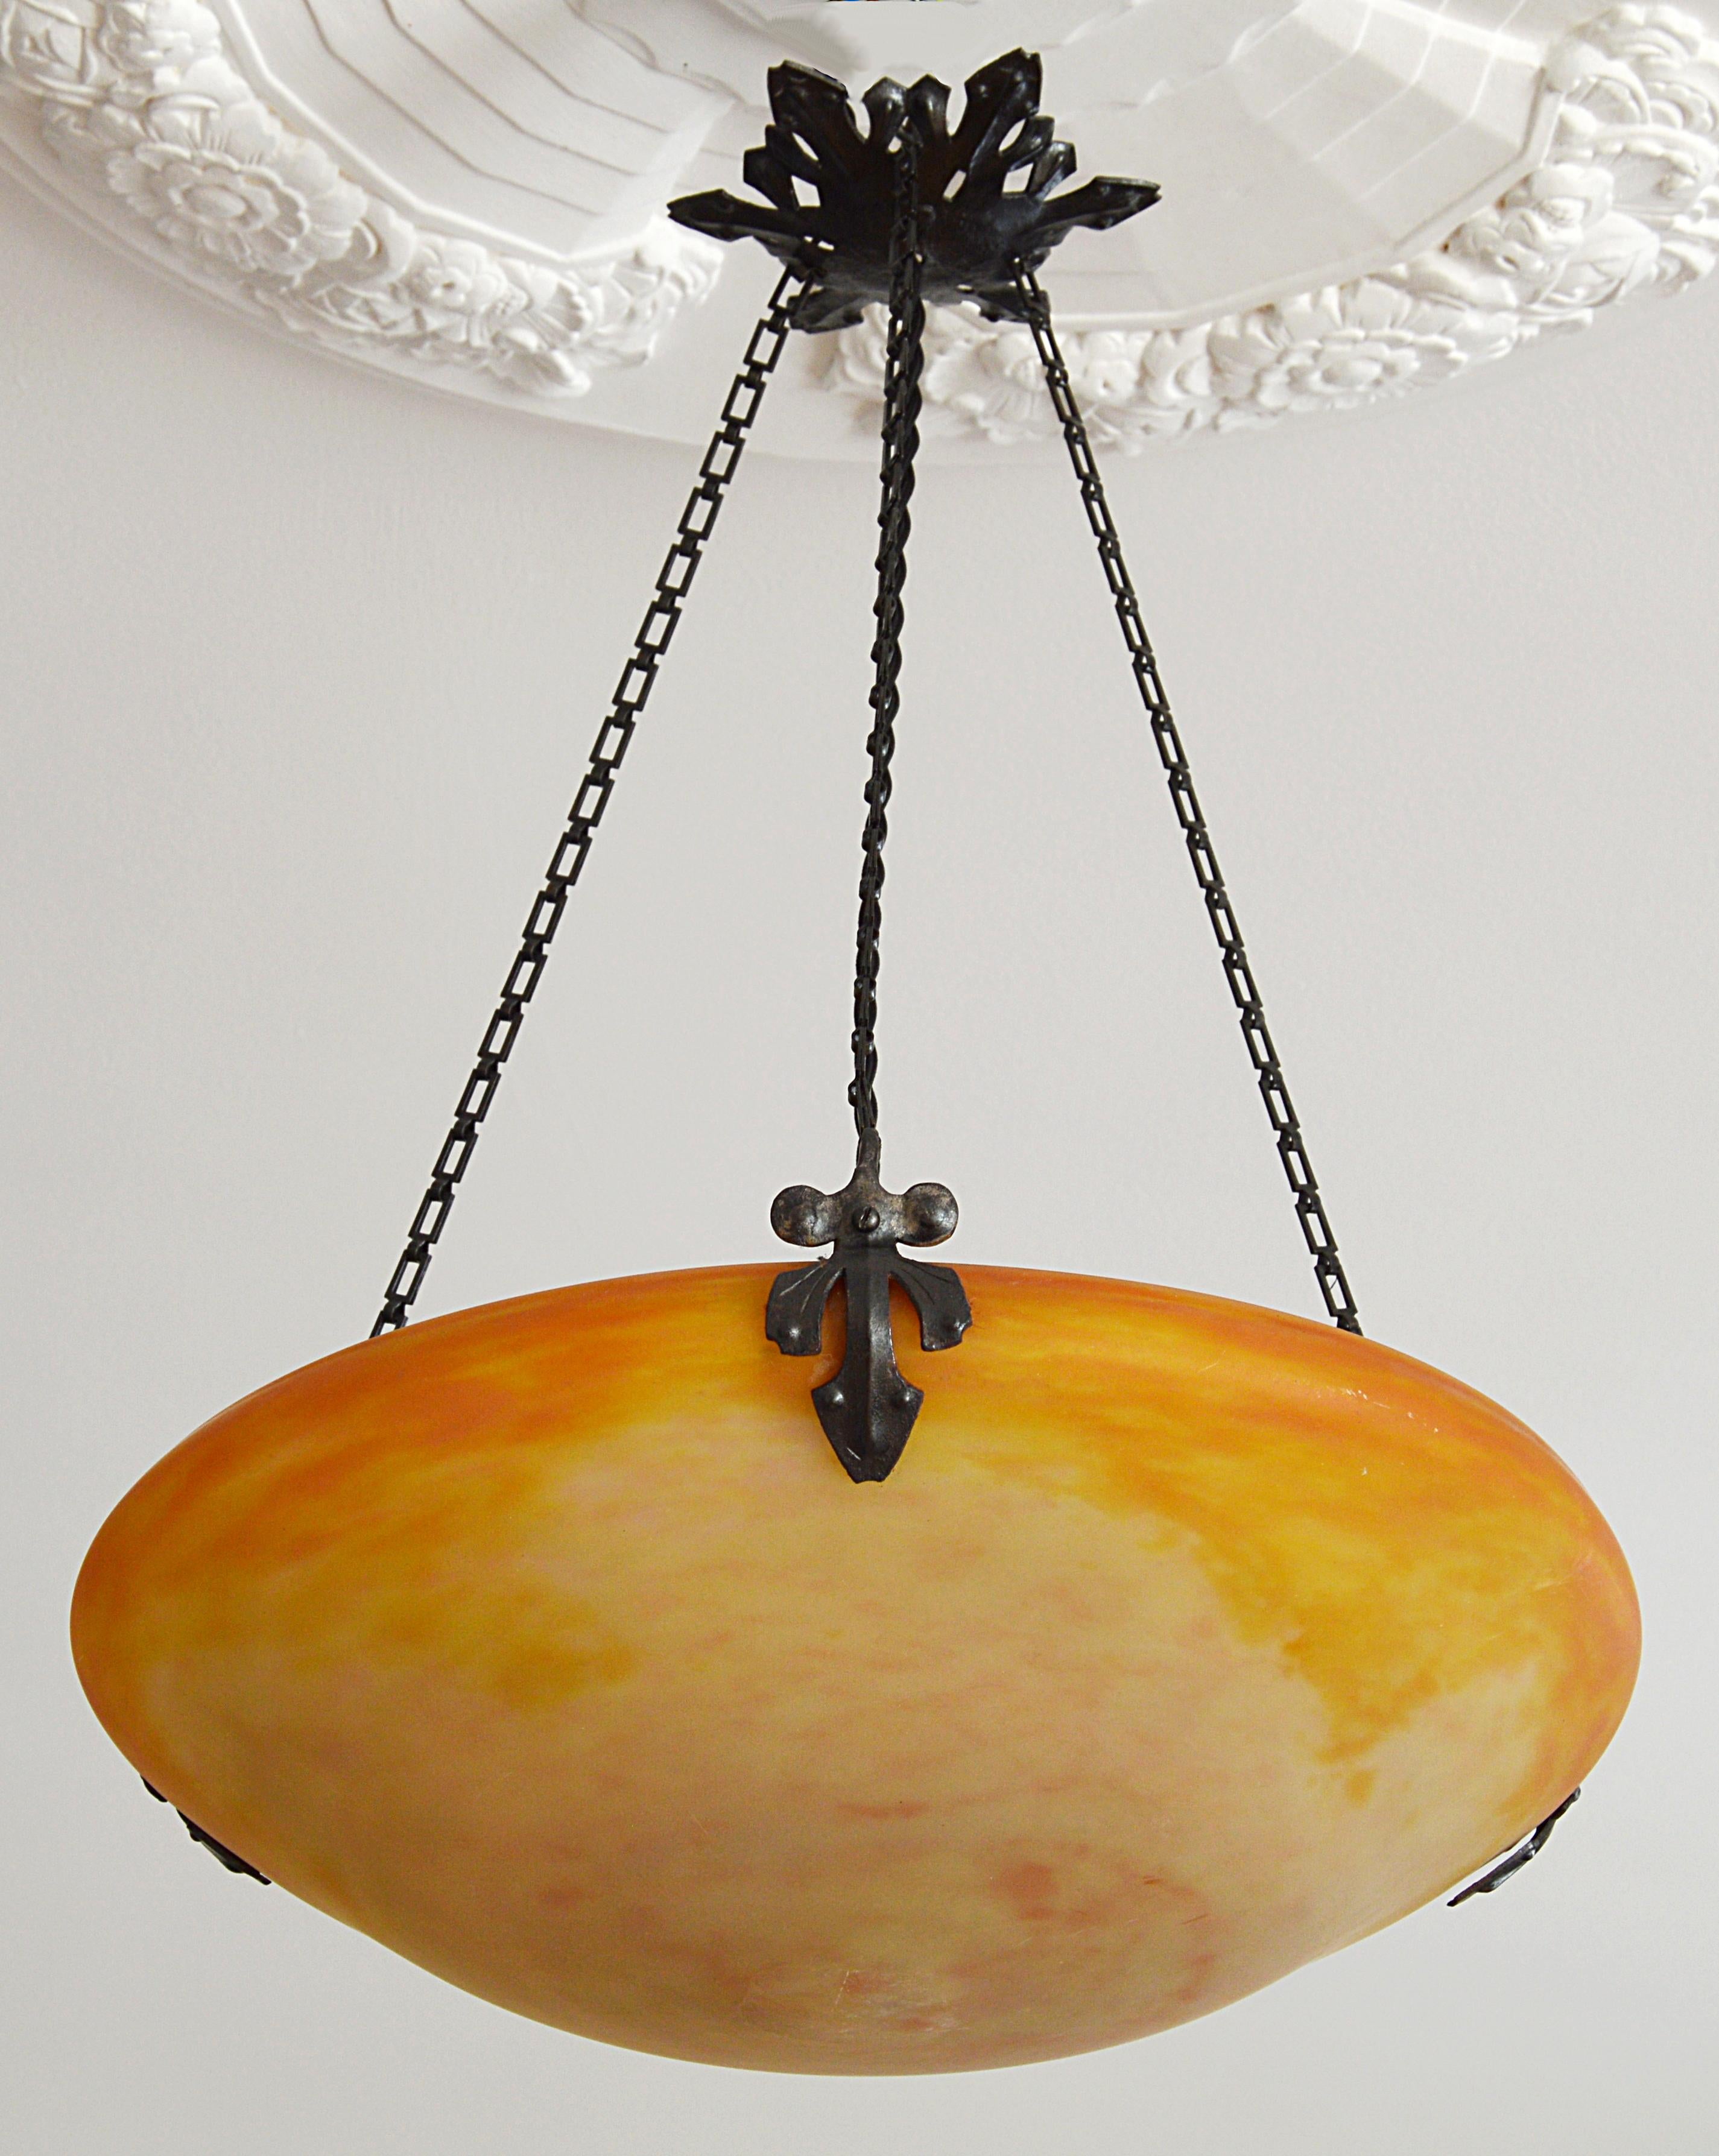 Any fair offer will be examined with the utmost attention, please send a message. French pendant chandelier by Daum (Nancy), France, 1900-1905. Blown double glass shade hung at its original wrought iron frame. Colors: pink, yellow, orange and white.